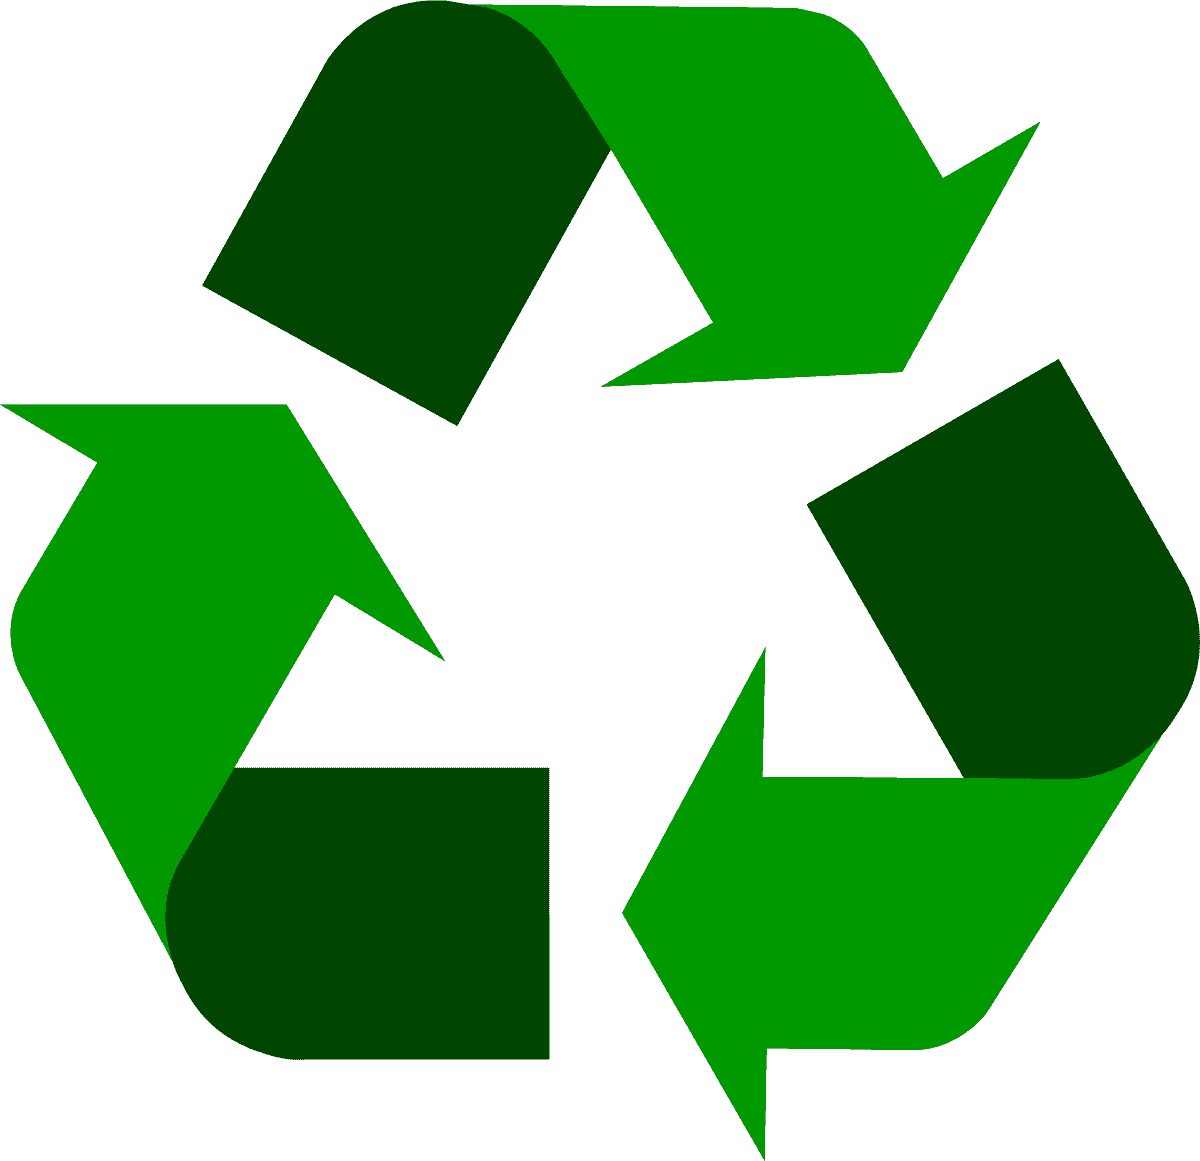 http://www.recycling.com/wp-content/uploads/2016/06/recycling-symbol-icon-twotone-dark-green.png